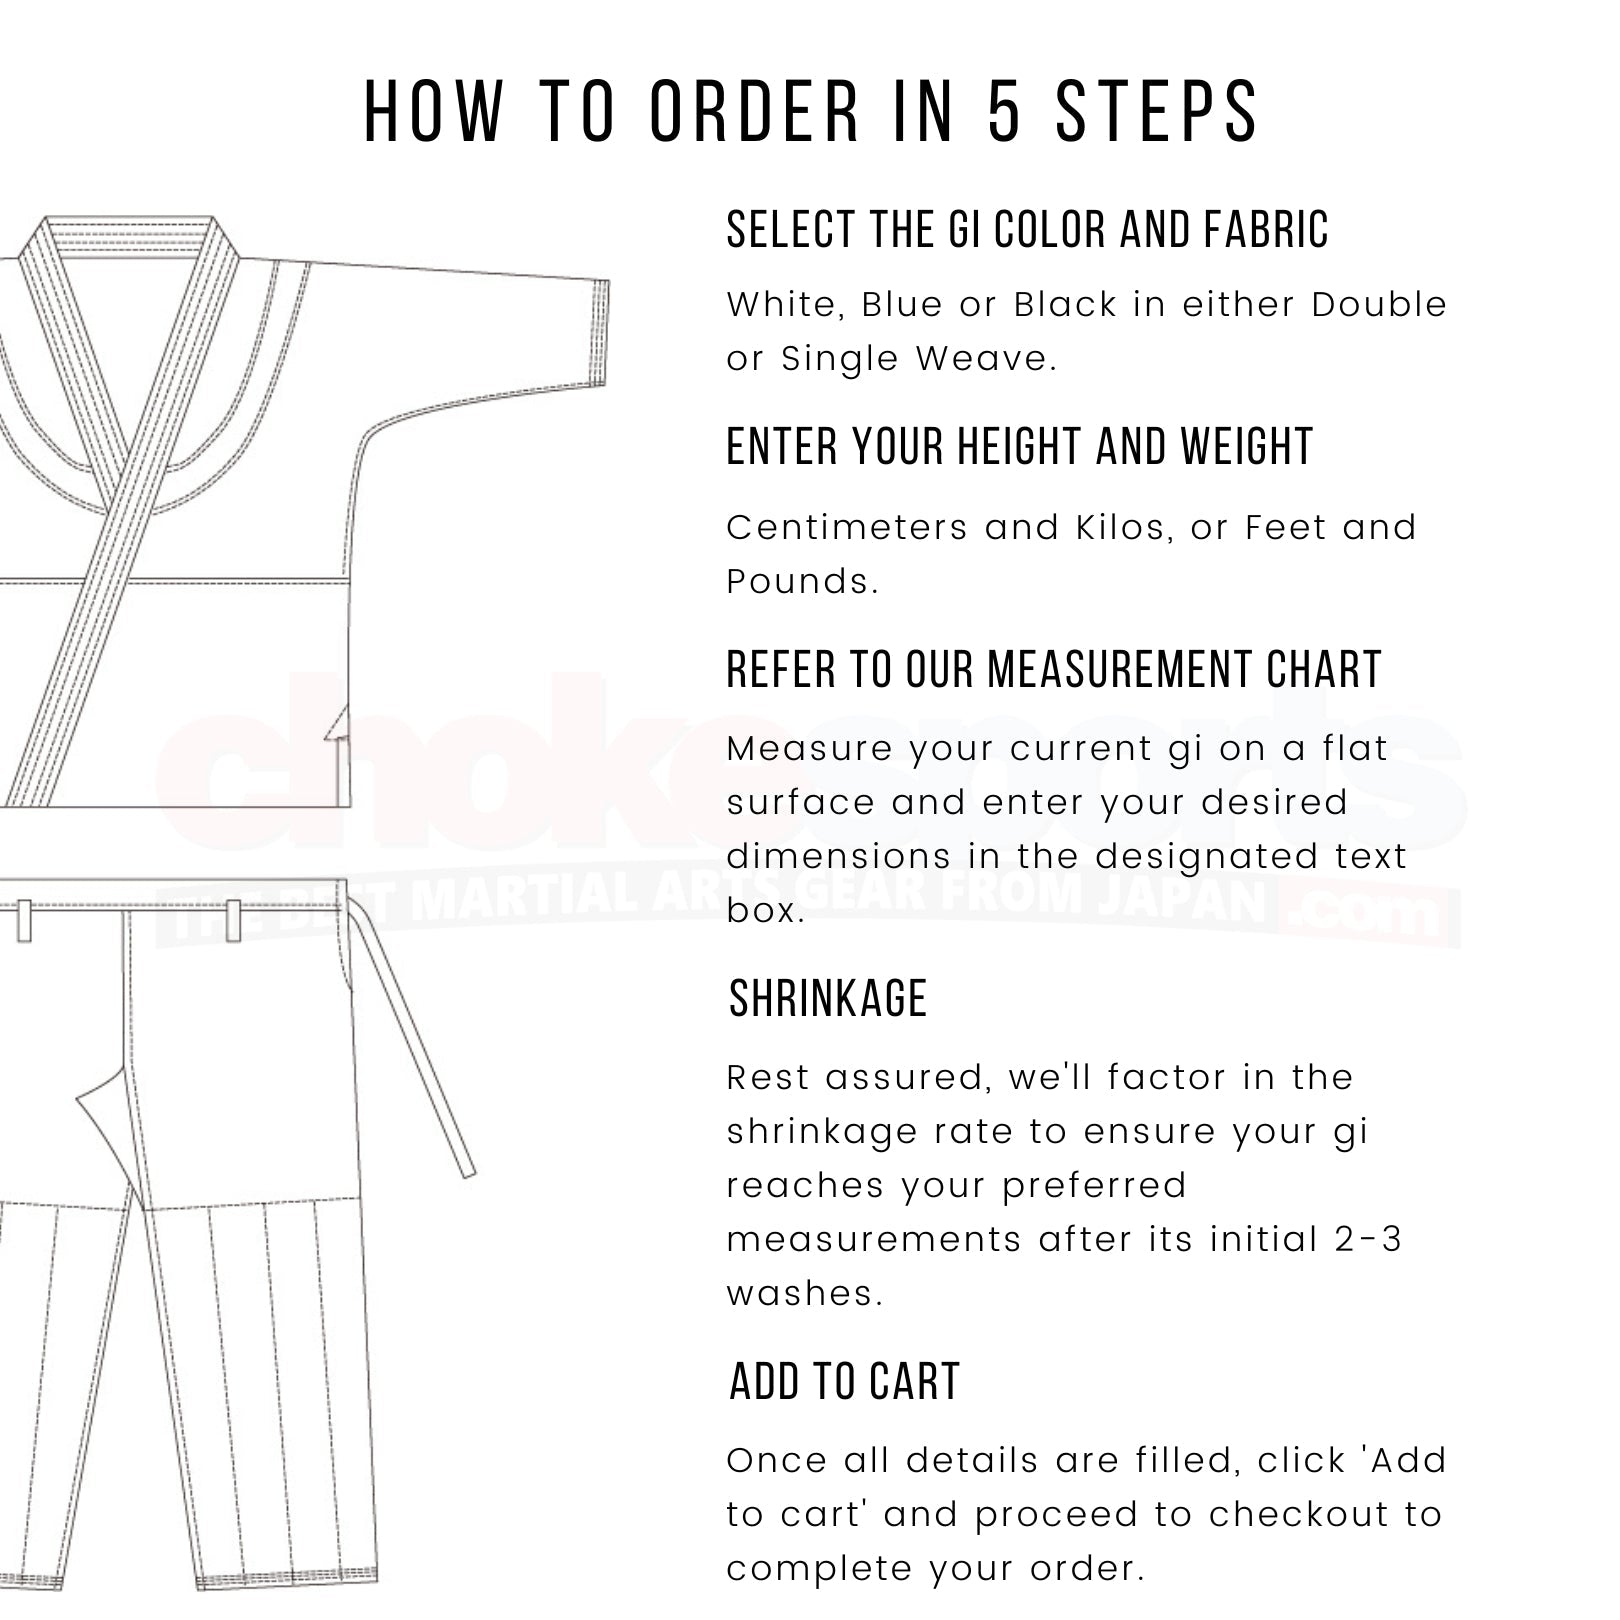 Custom Uniforms - Check Out Our Fit Guide